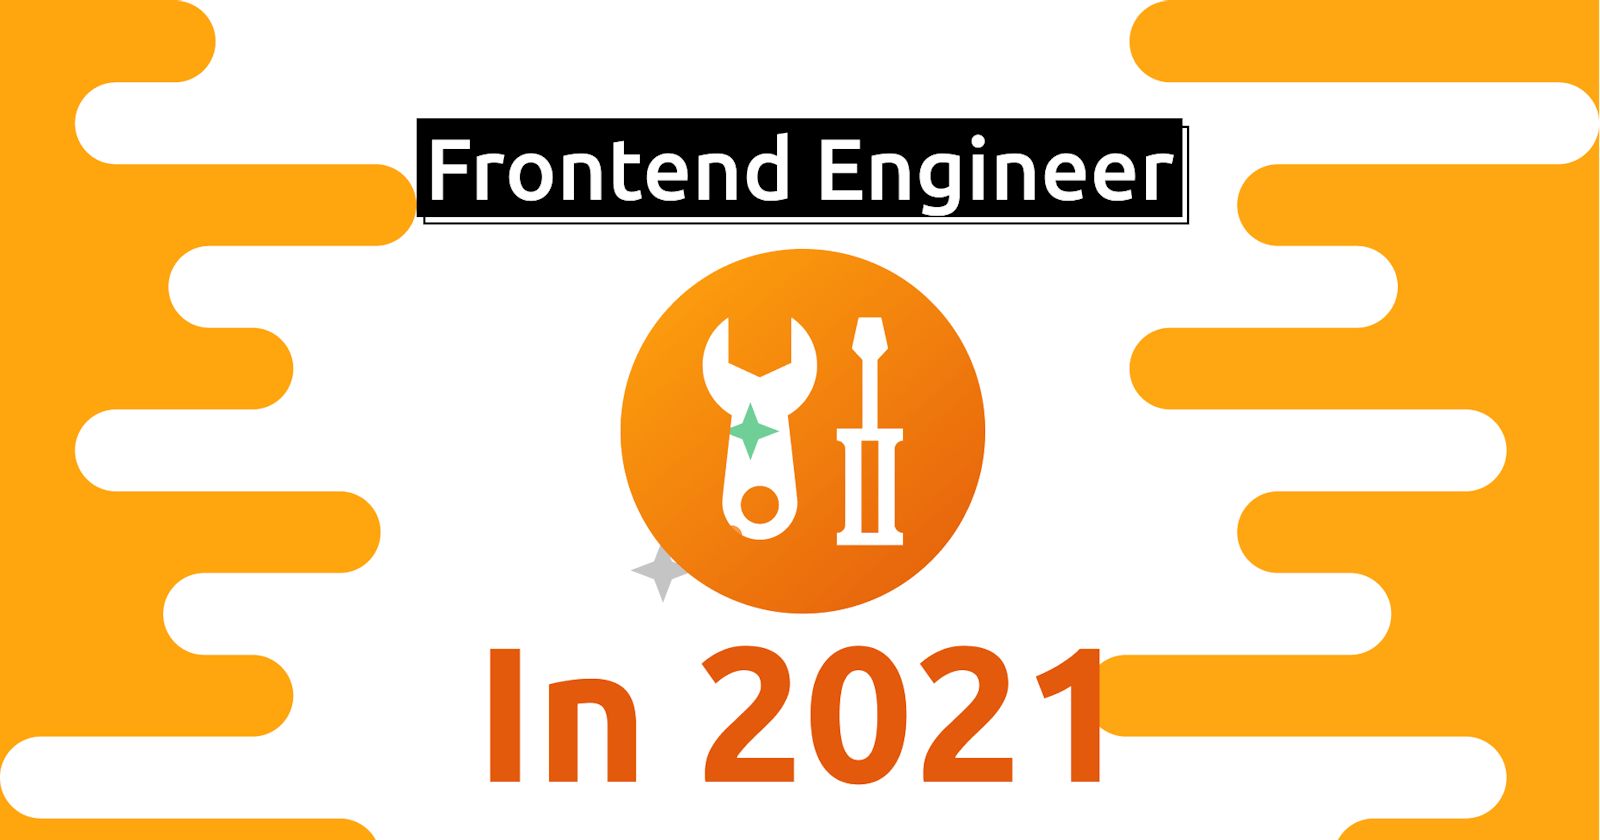 Front-end Engineer in 2021